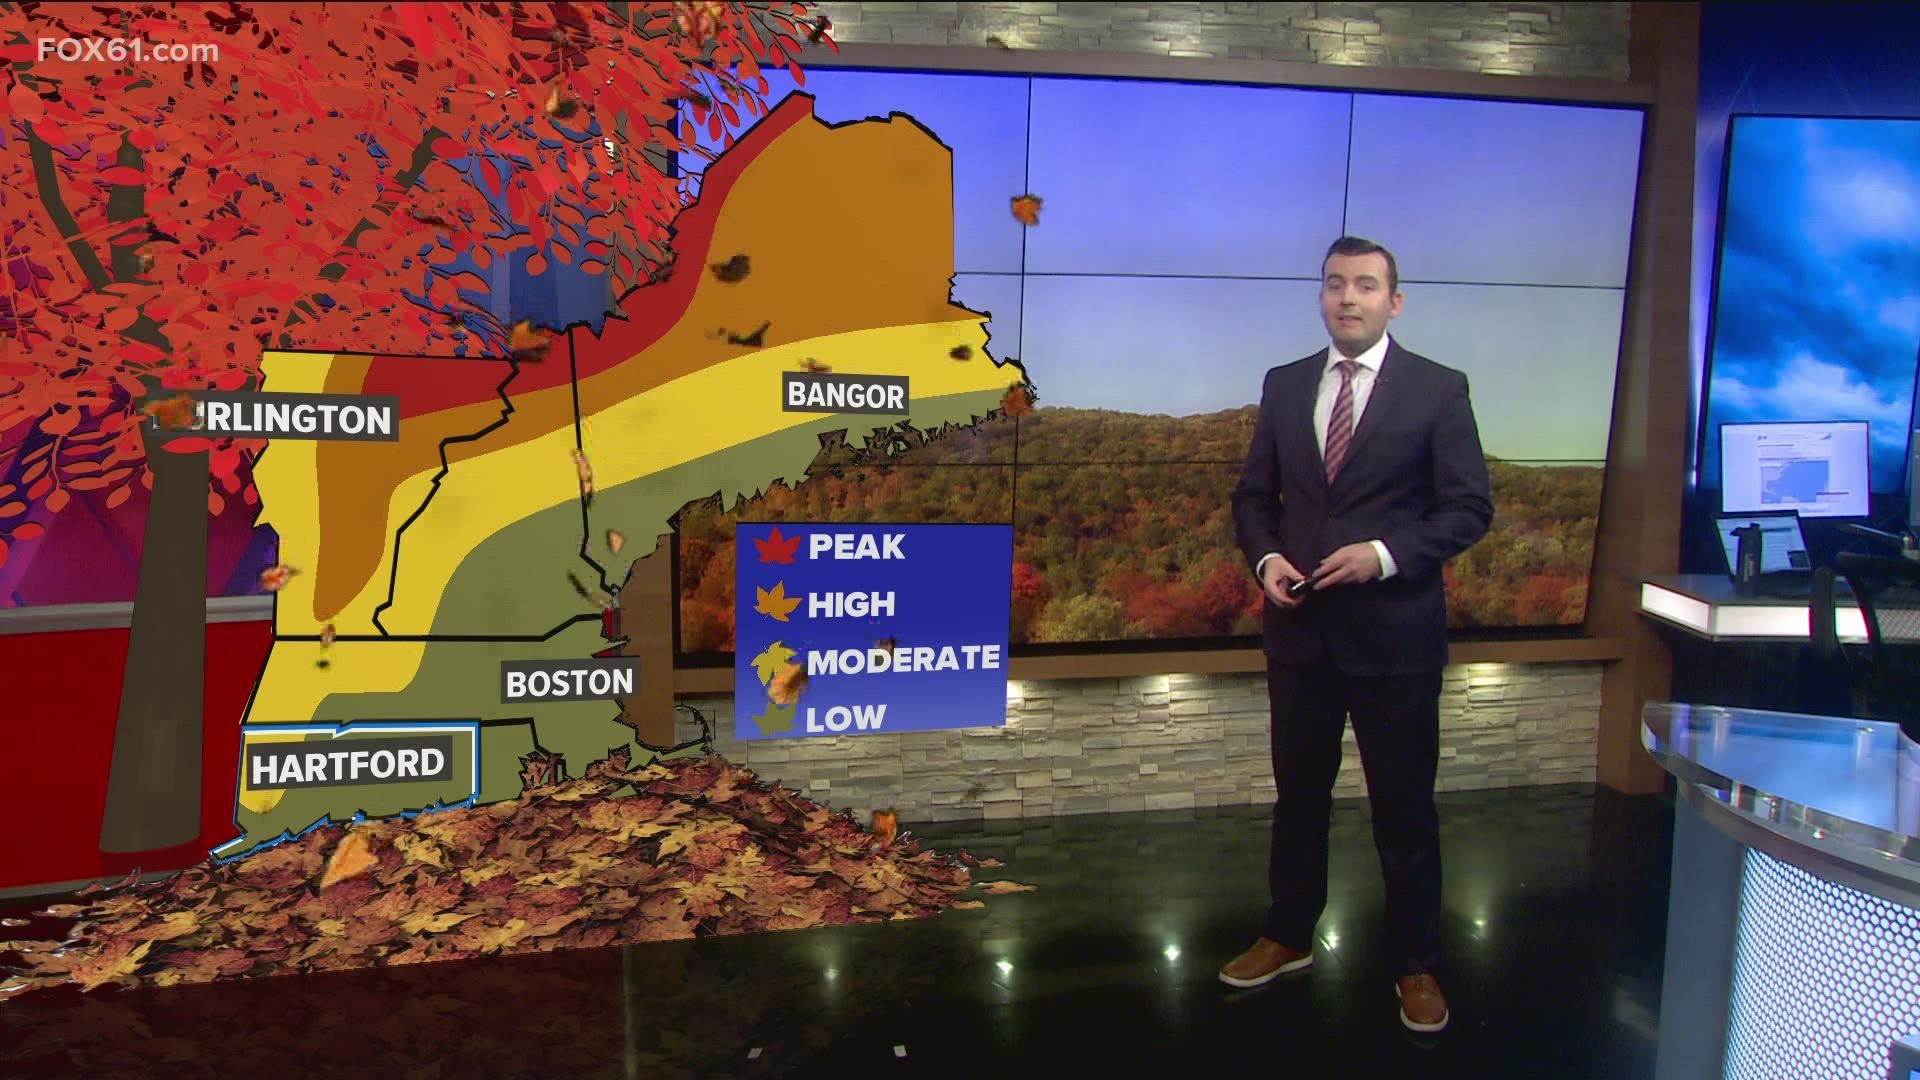 Fall is here, but it seems like peak foliage is lagging a bit behind schedule in most of New England.